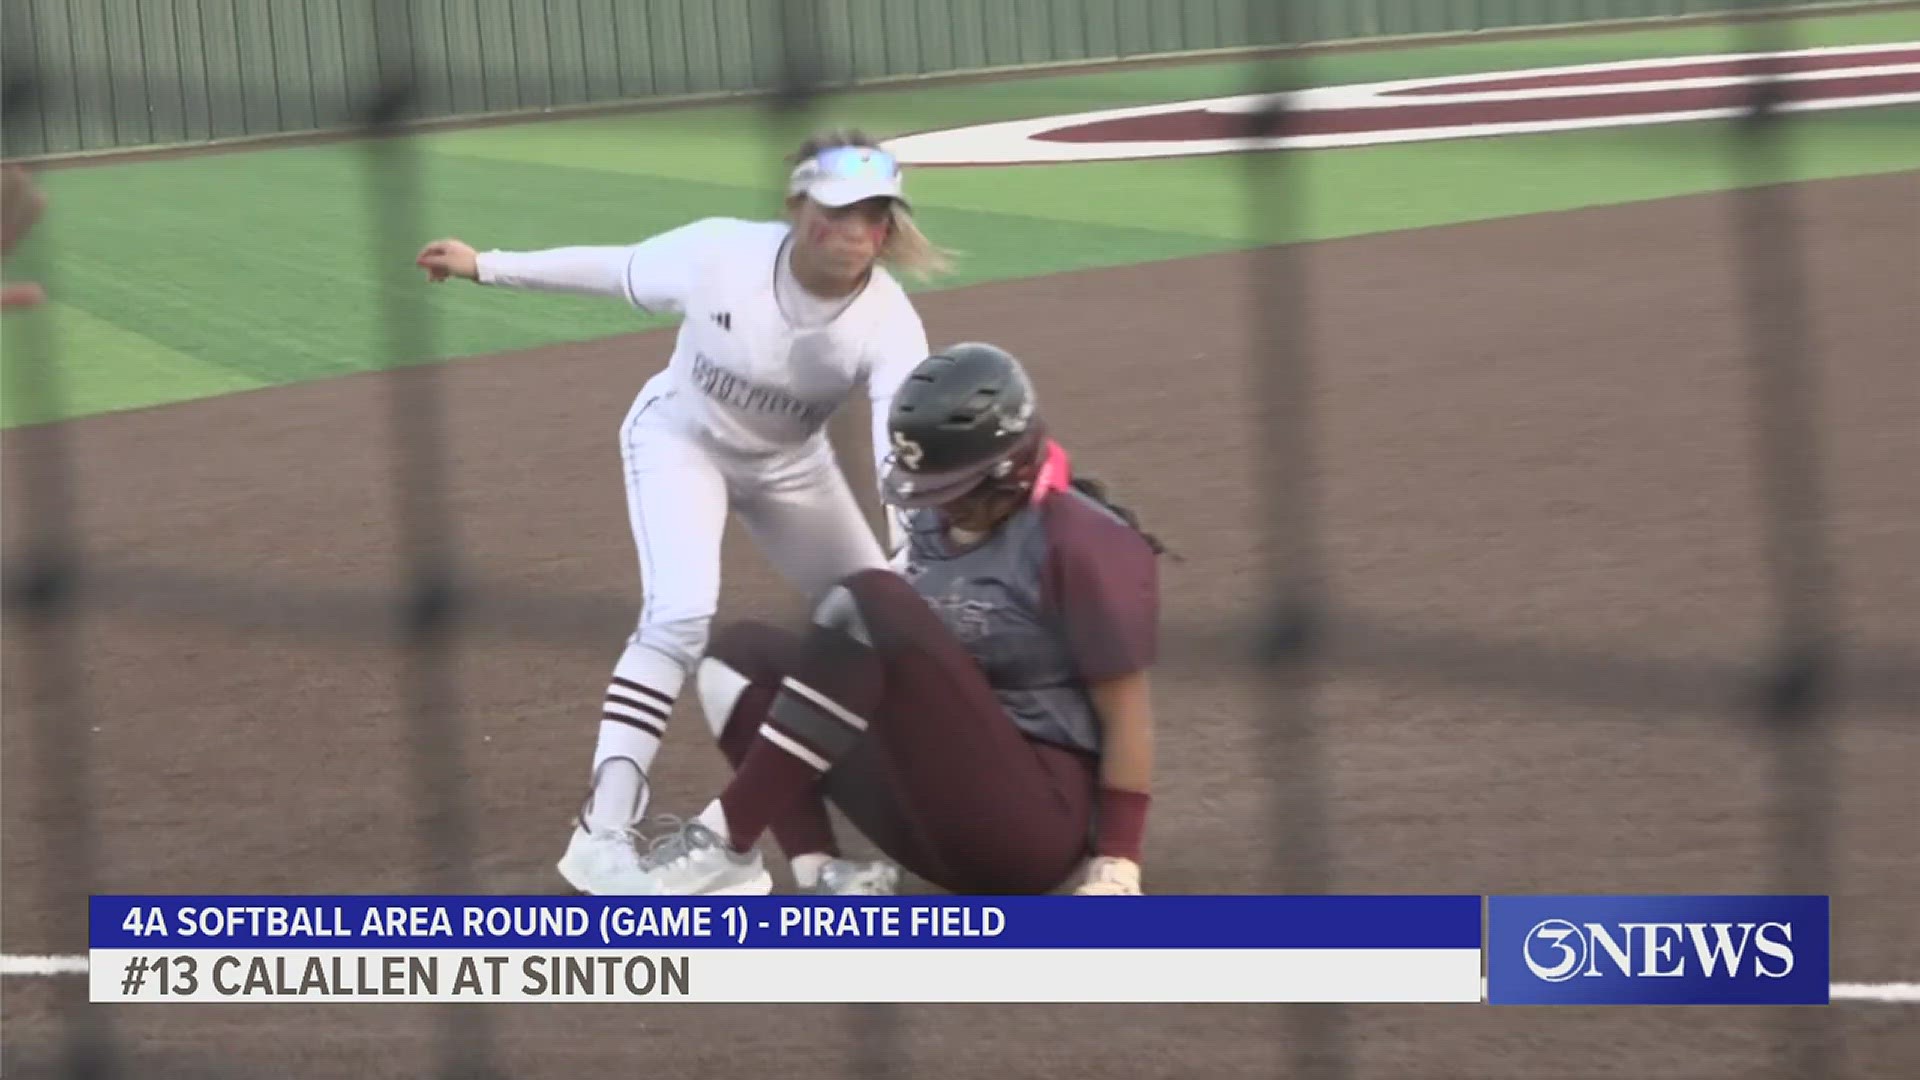 Calallen and Sinton face off for the first time ever in the post season. The Wildcats take care of business with a 17-3 final in game one of the series.